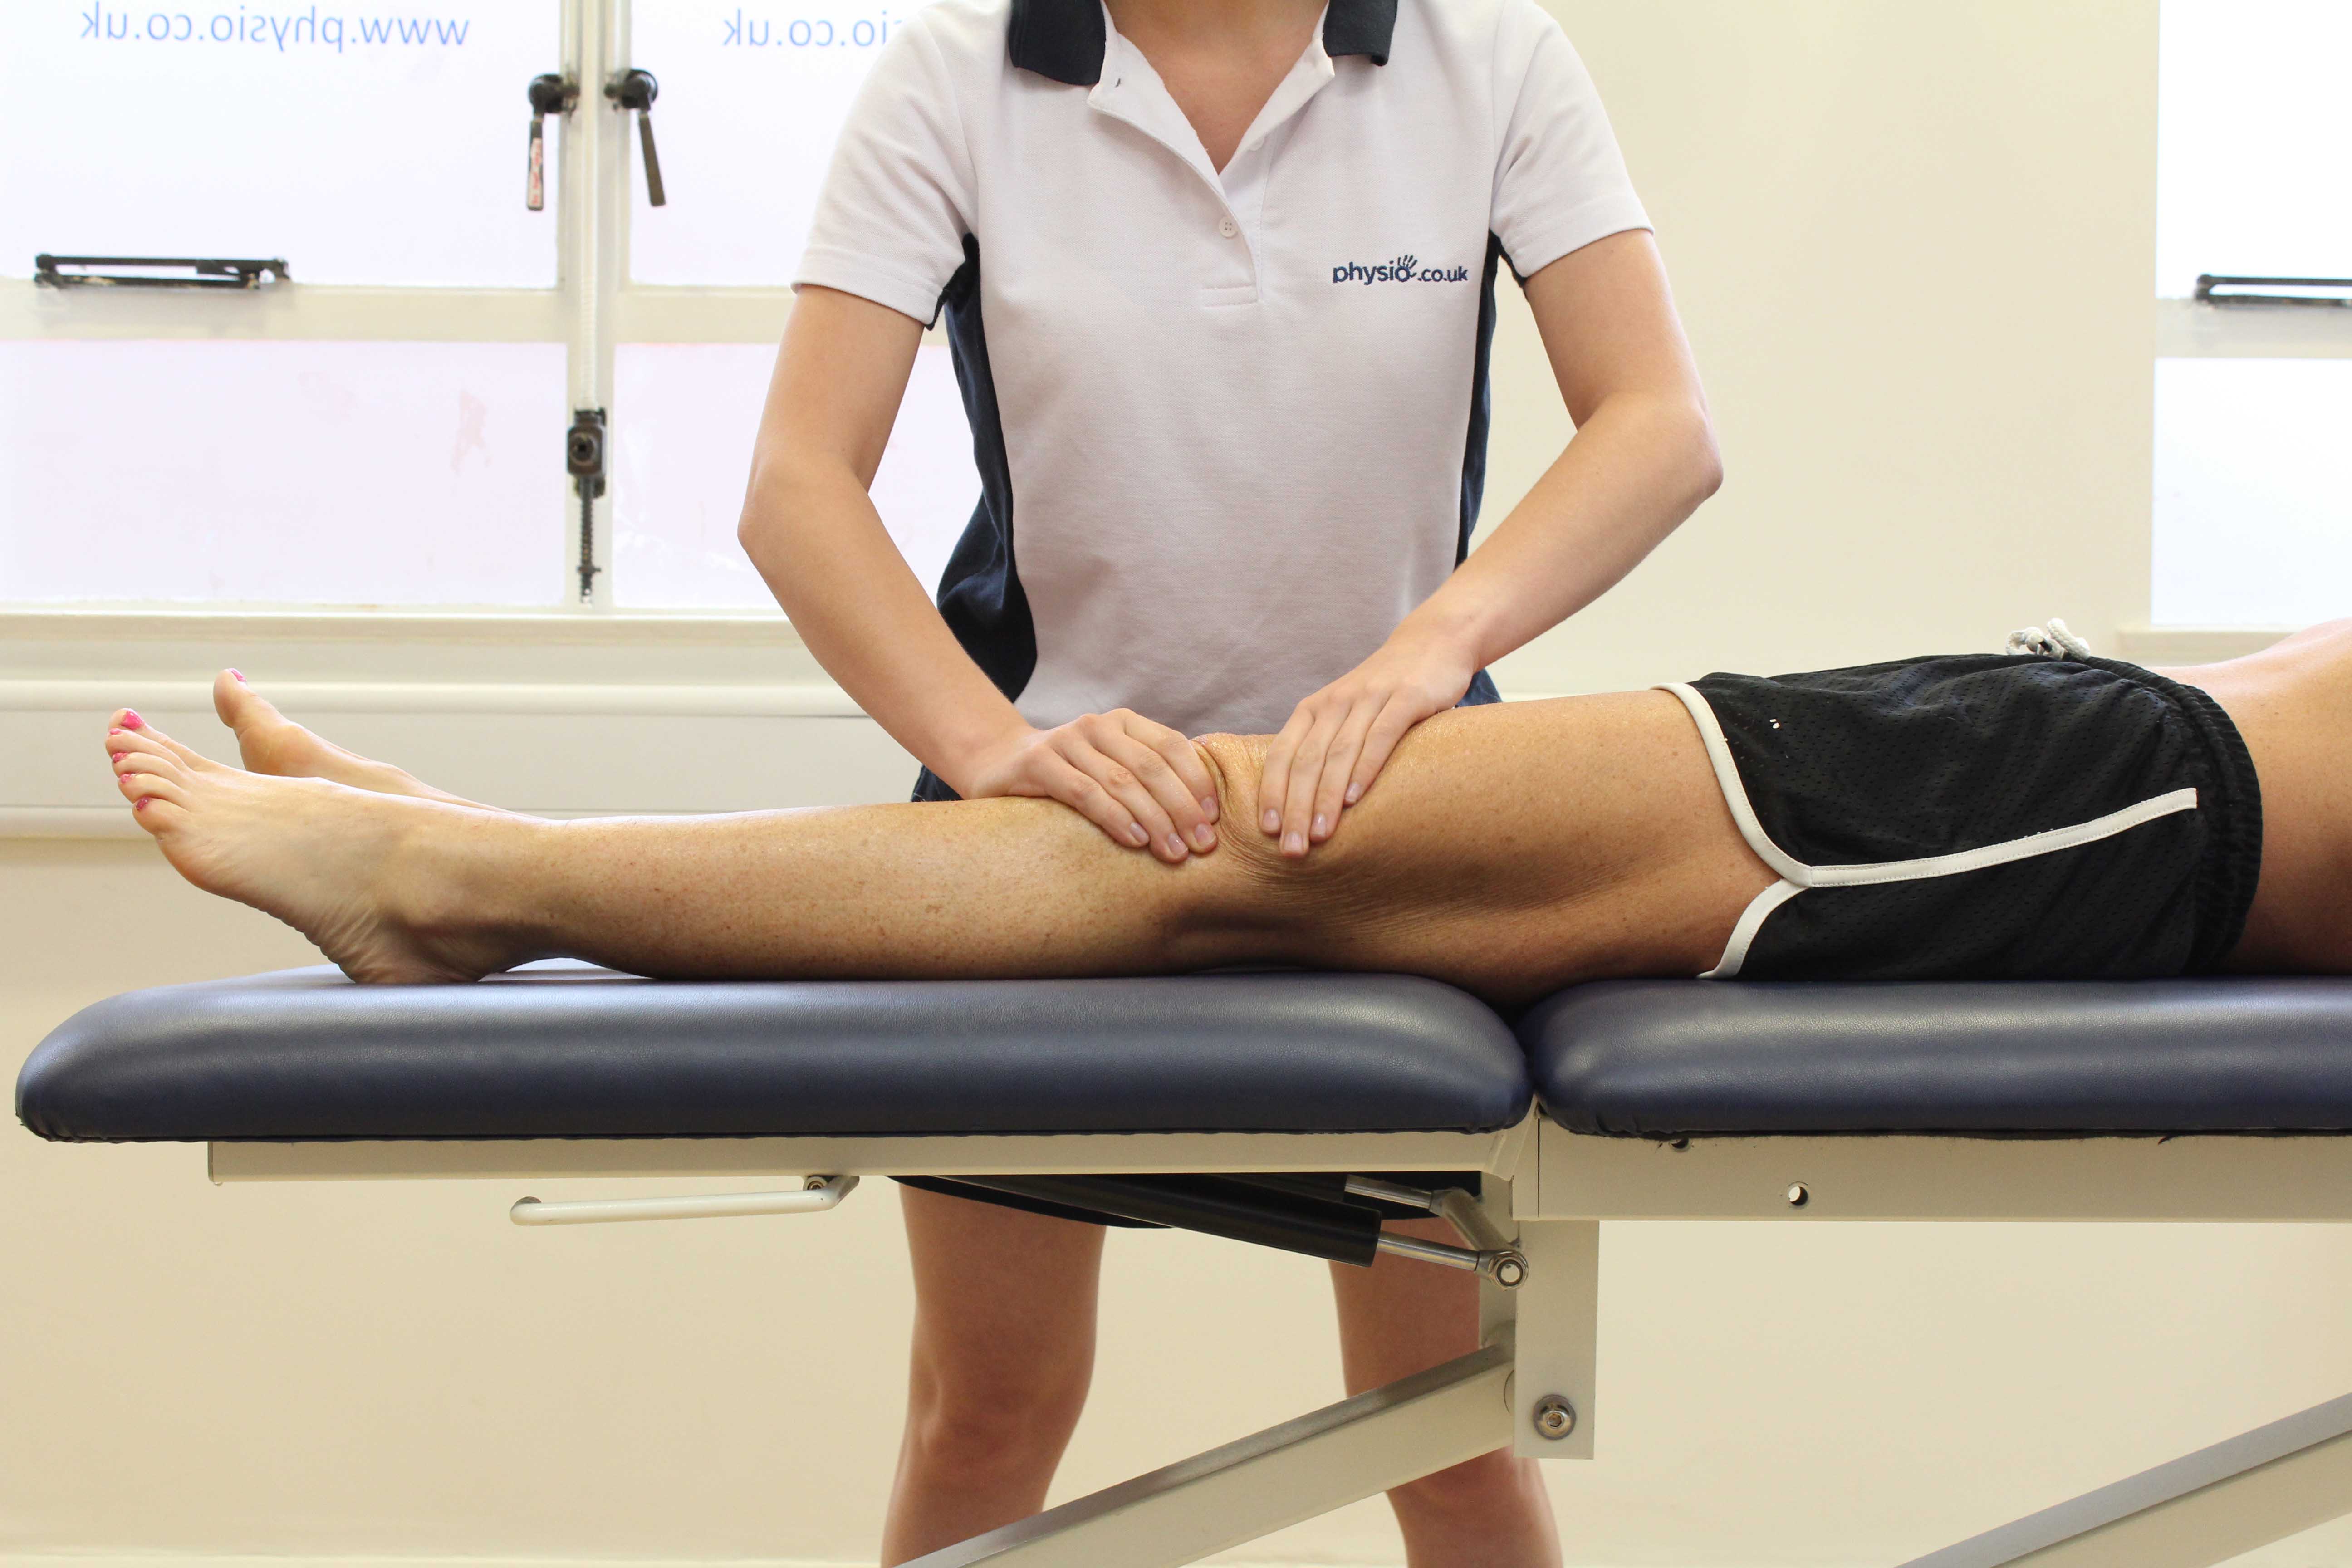 Massage and mobilisations of the joint and connective tissue of the knee